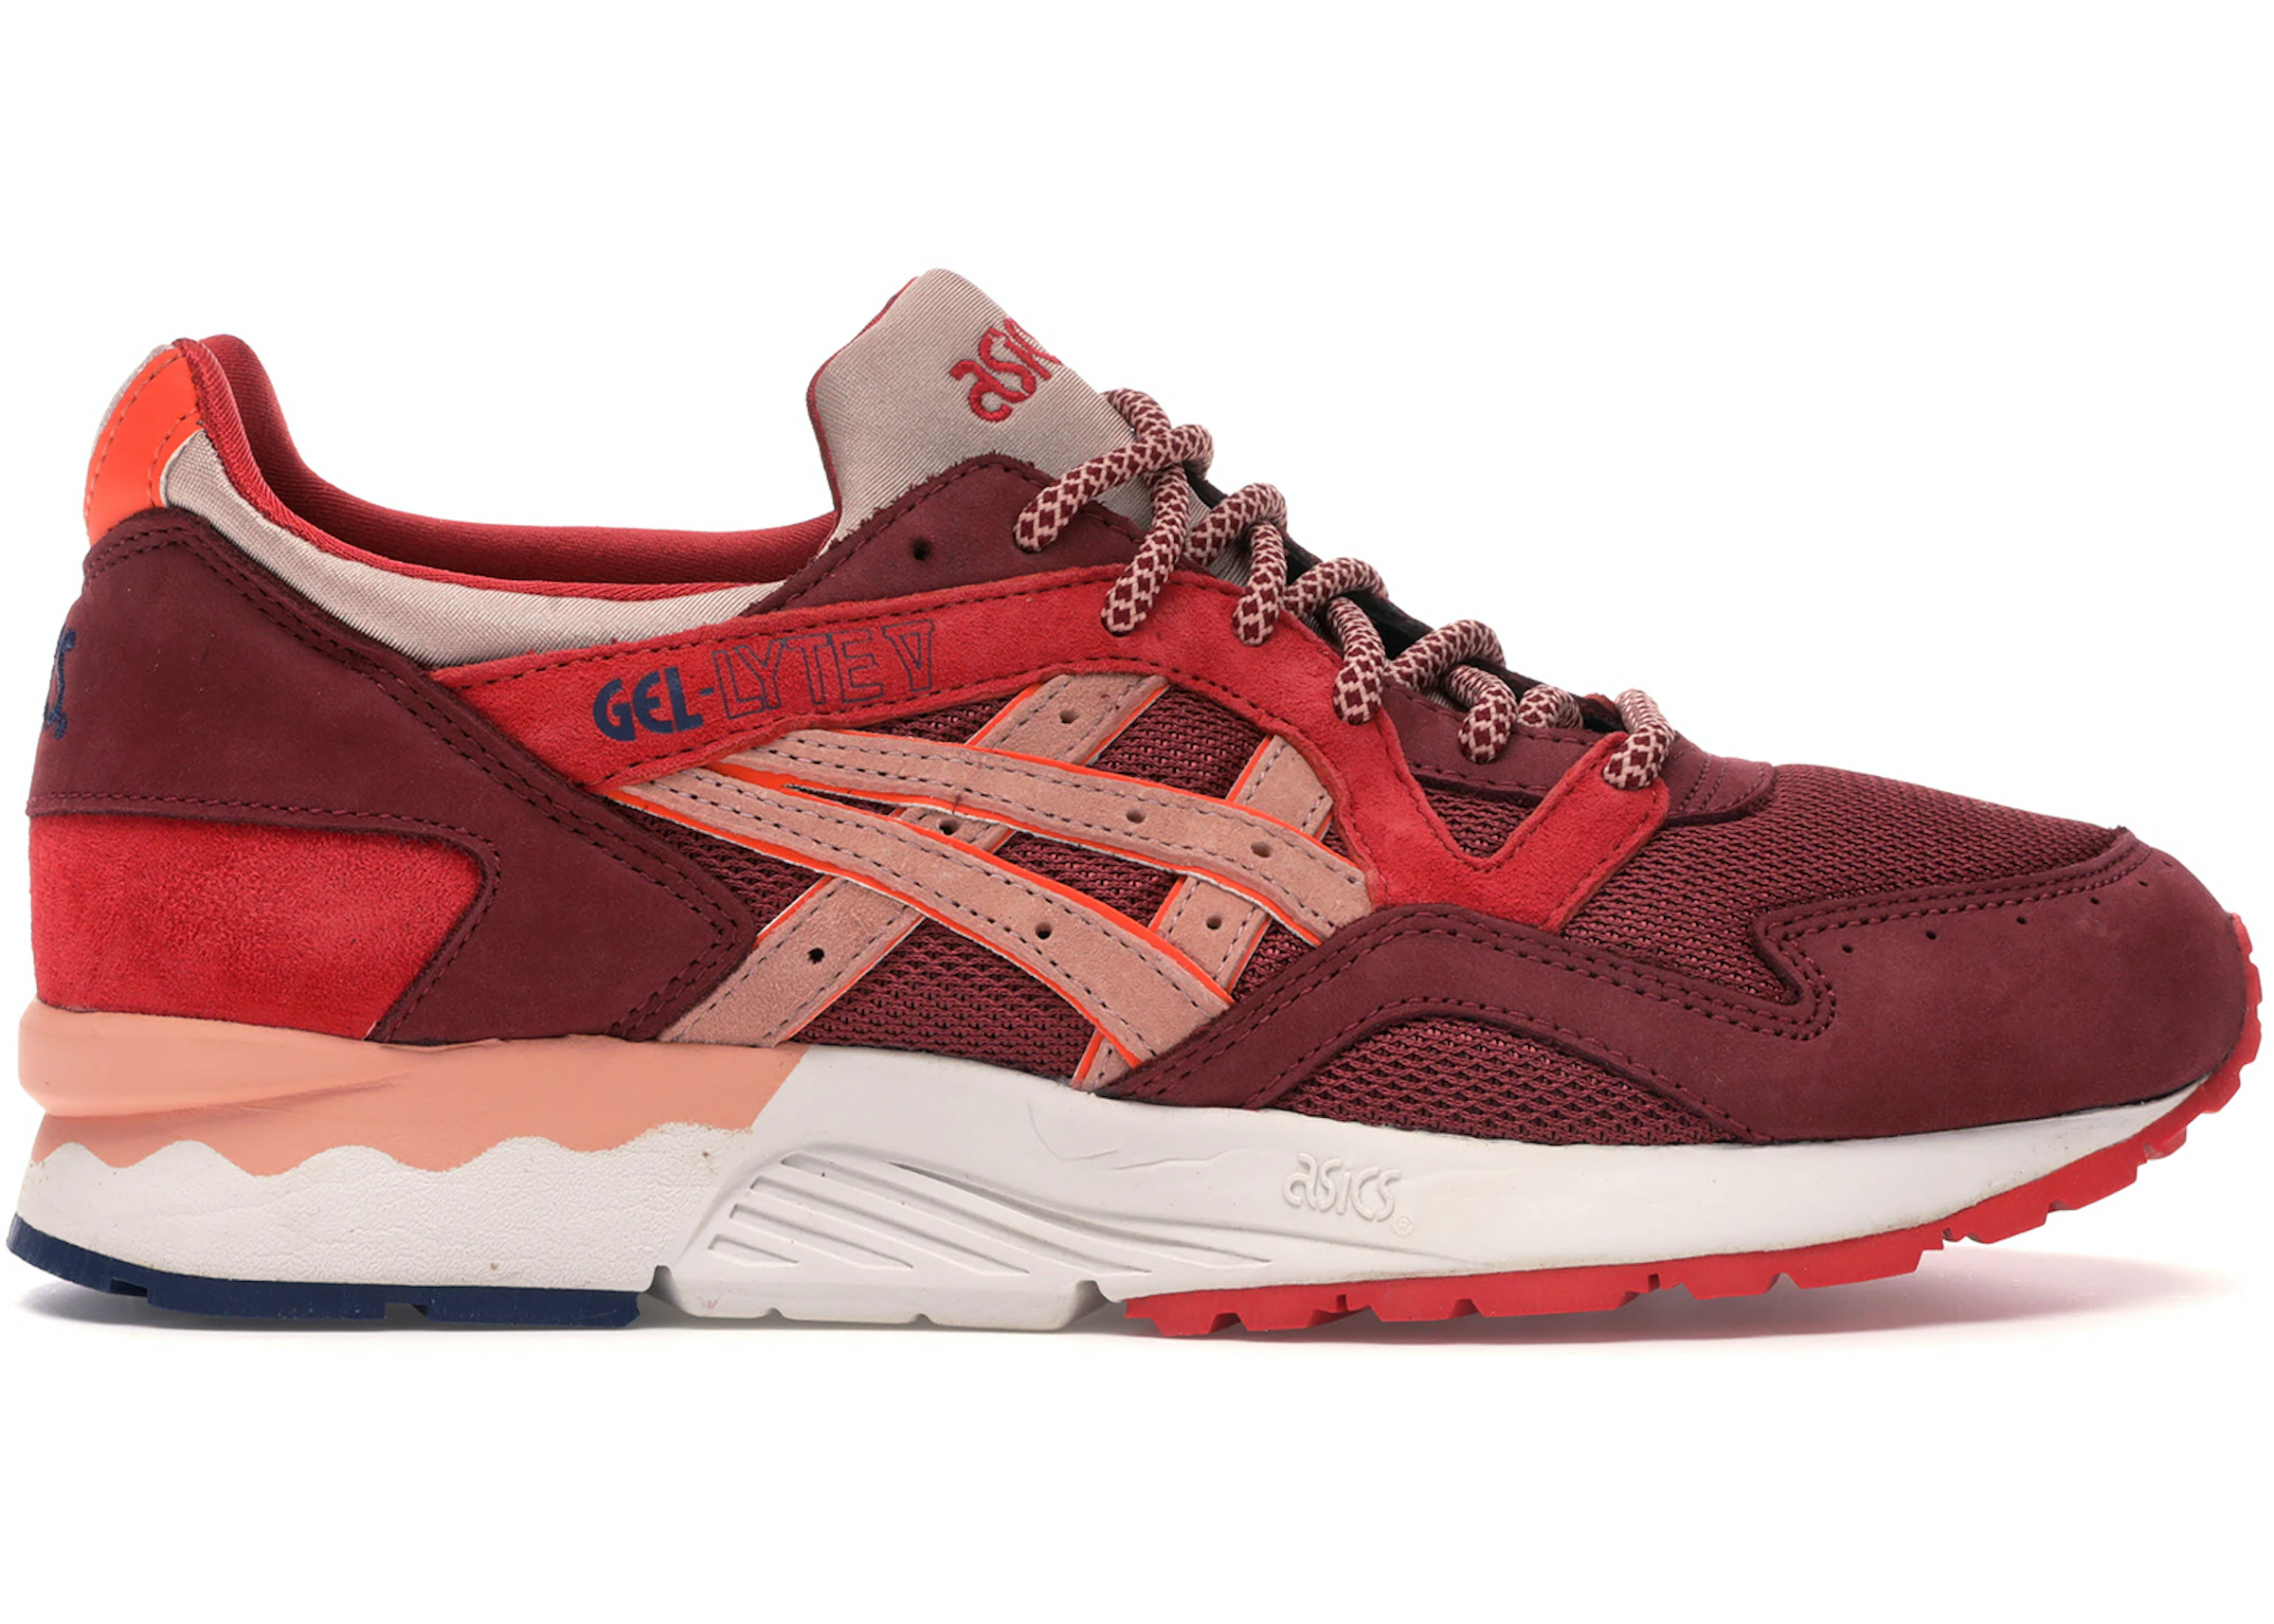 Buy ASICS Ronnie Fieg Shoes & New Sneakers - StockX